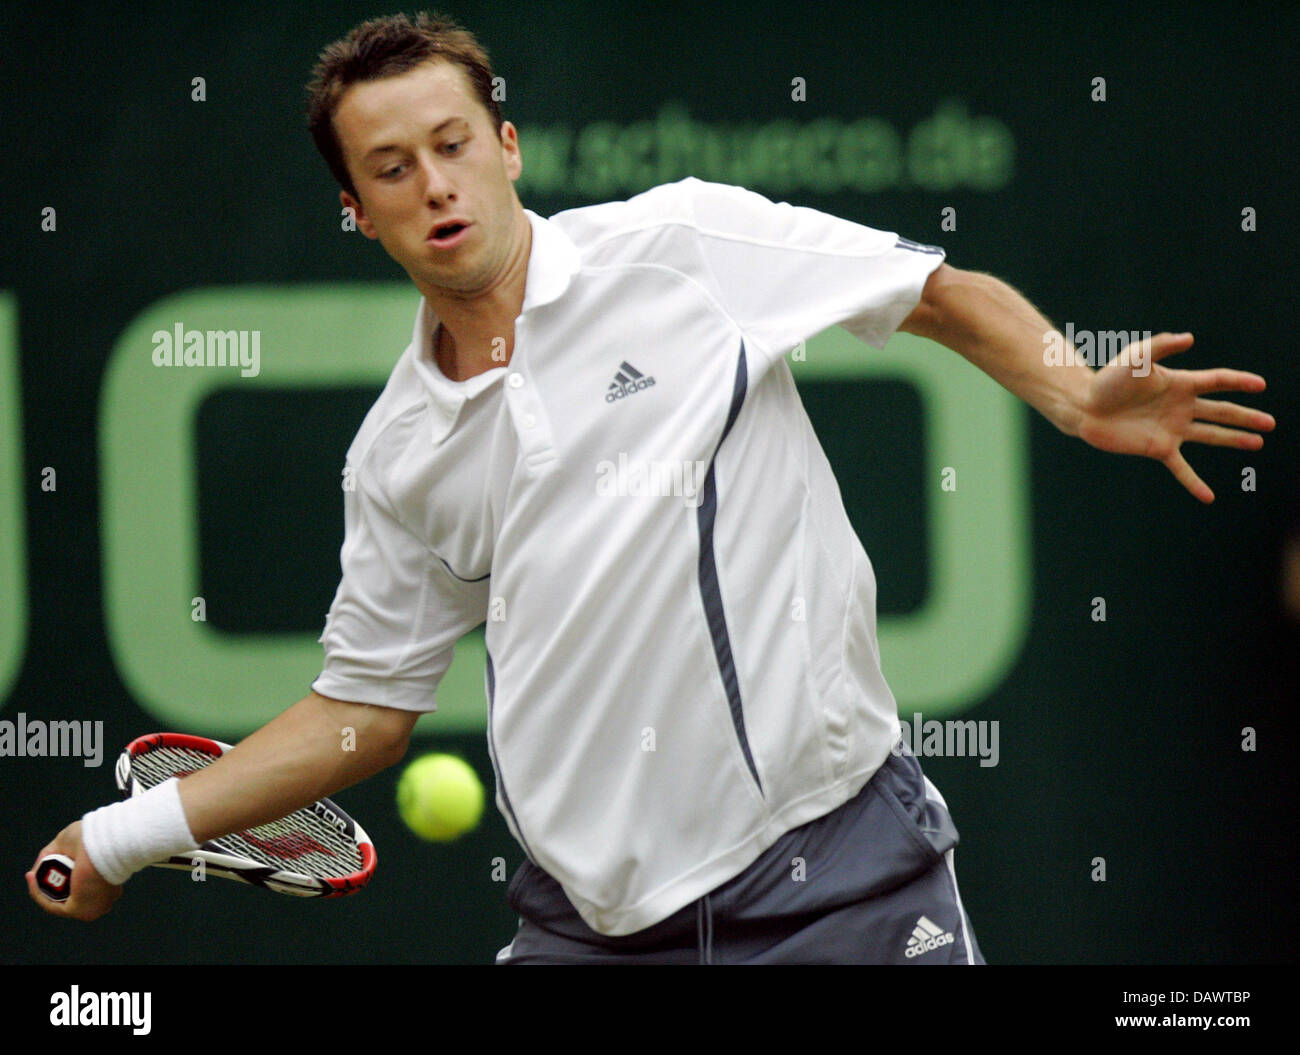 German tennis pro Philipp Kohlschreiber hits a forehand in his quarter-finals match against seeded US James Blake at the 15th Gerry Weber Open in Halle/Westfalia, Germany, 15 June 2007. Kohlschreiber defeats Blake 6-4, 6-3. Photo: Bernd Thissen Stock Photo